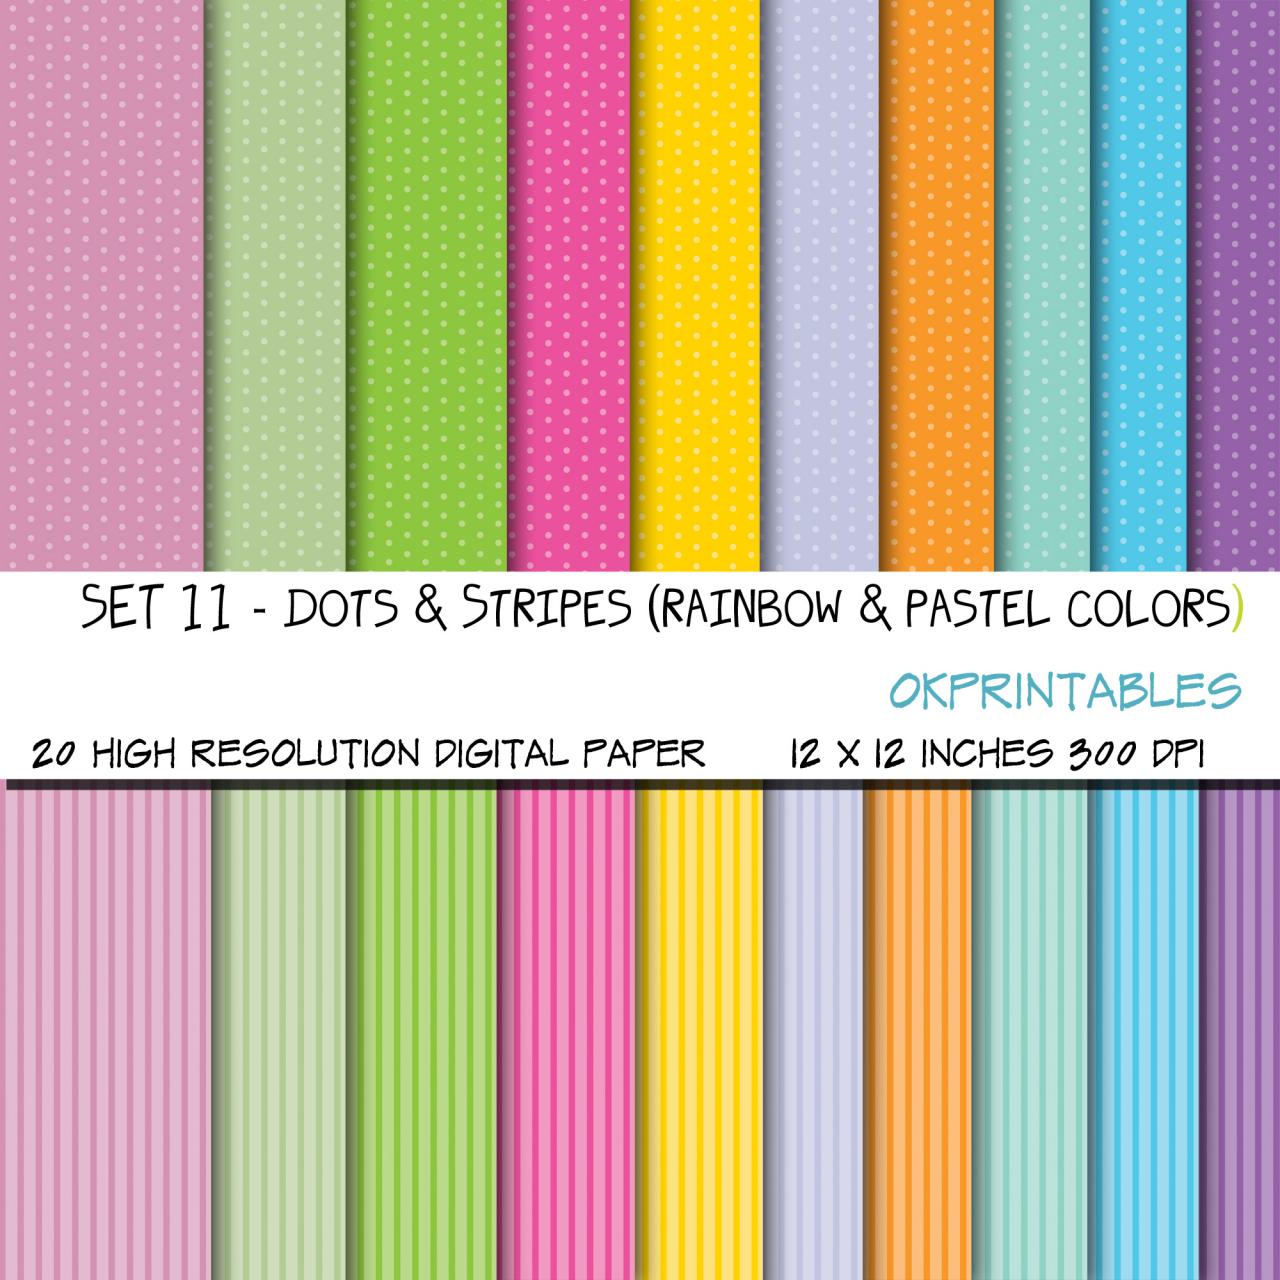 Set 011 - Dots and stripes in rainbow and pastel colros, Digital Background, Scrapbook Paper, Printable Paper, Web Design